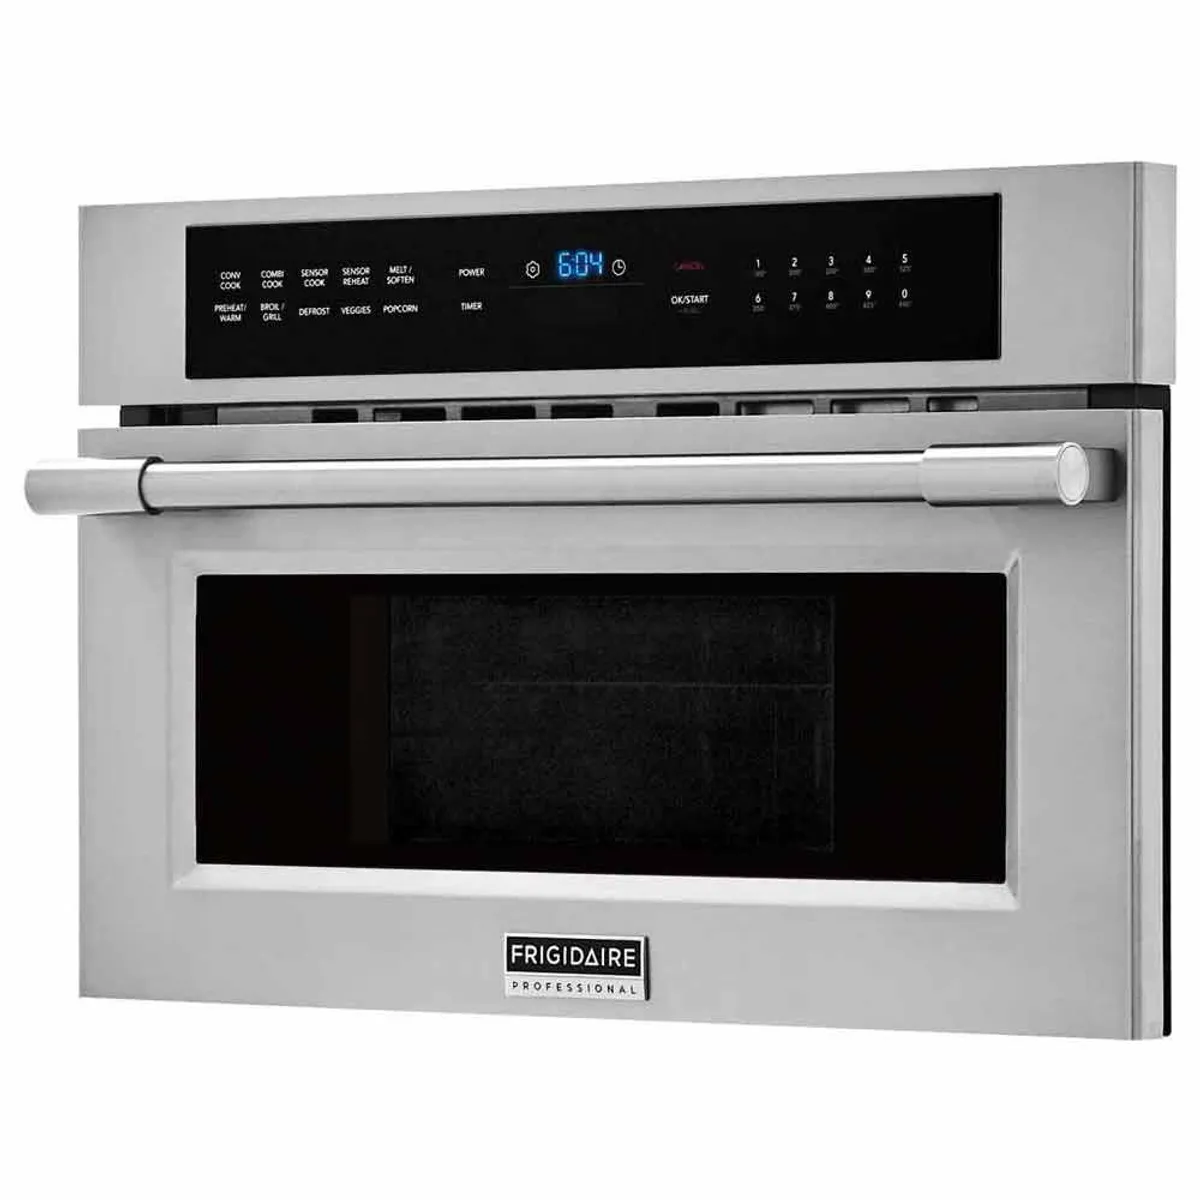 FRIGIDAIRE FPMO3077TF Professional 30 inch Built-in Convection Microwave Oven